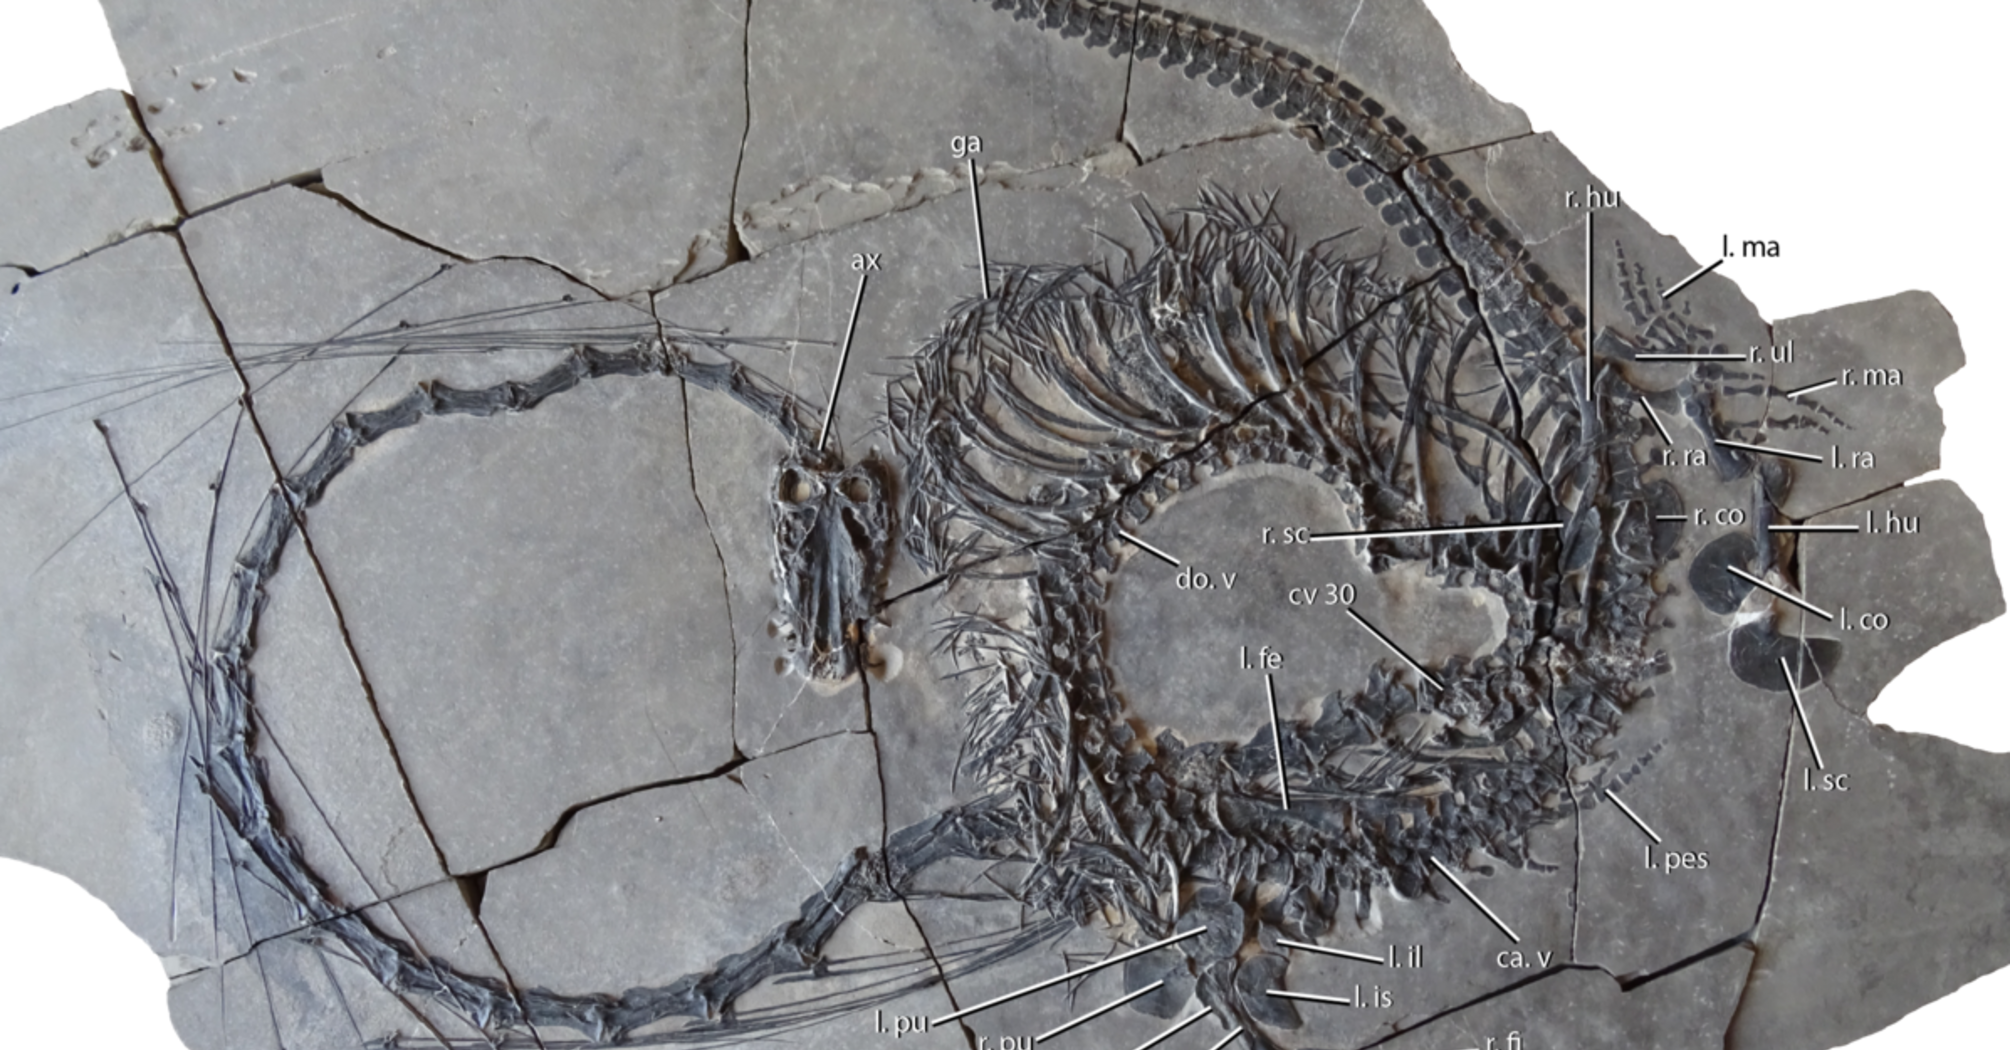 Scientists have discovered a fossil of a protorosaur resembling fantasy dragons